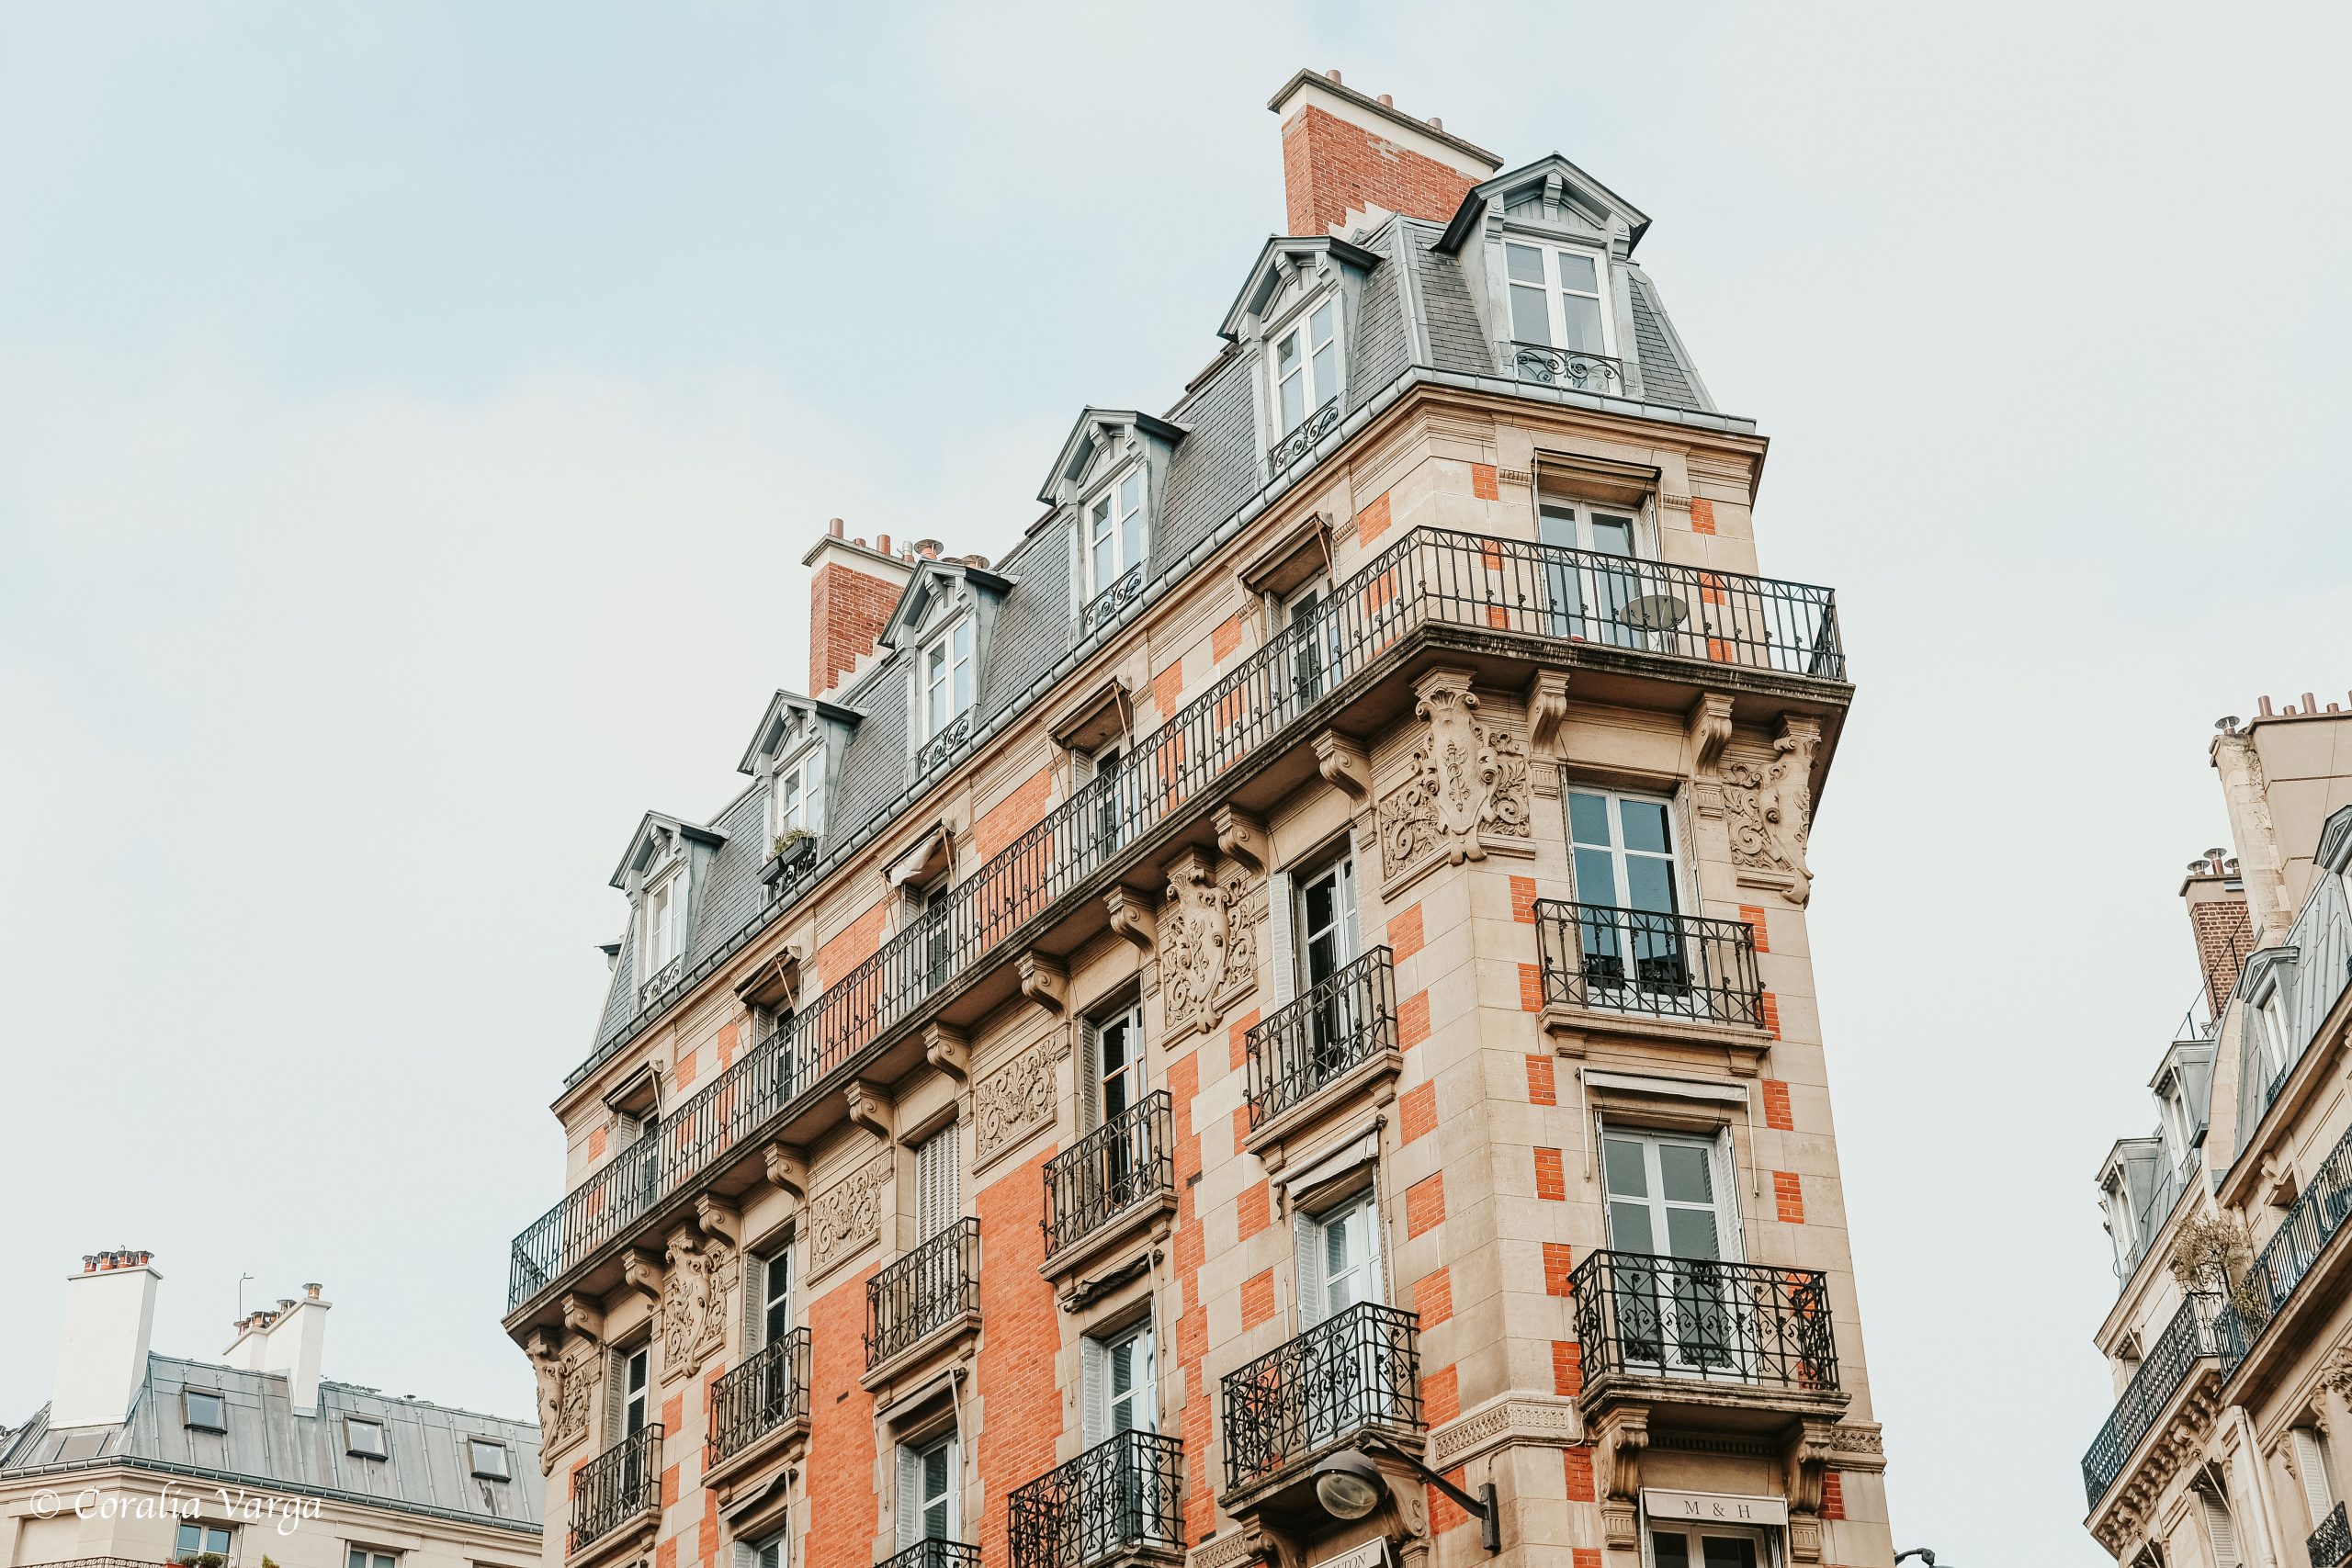 Beautiful city of Paris with its gorgeous buildings